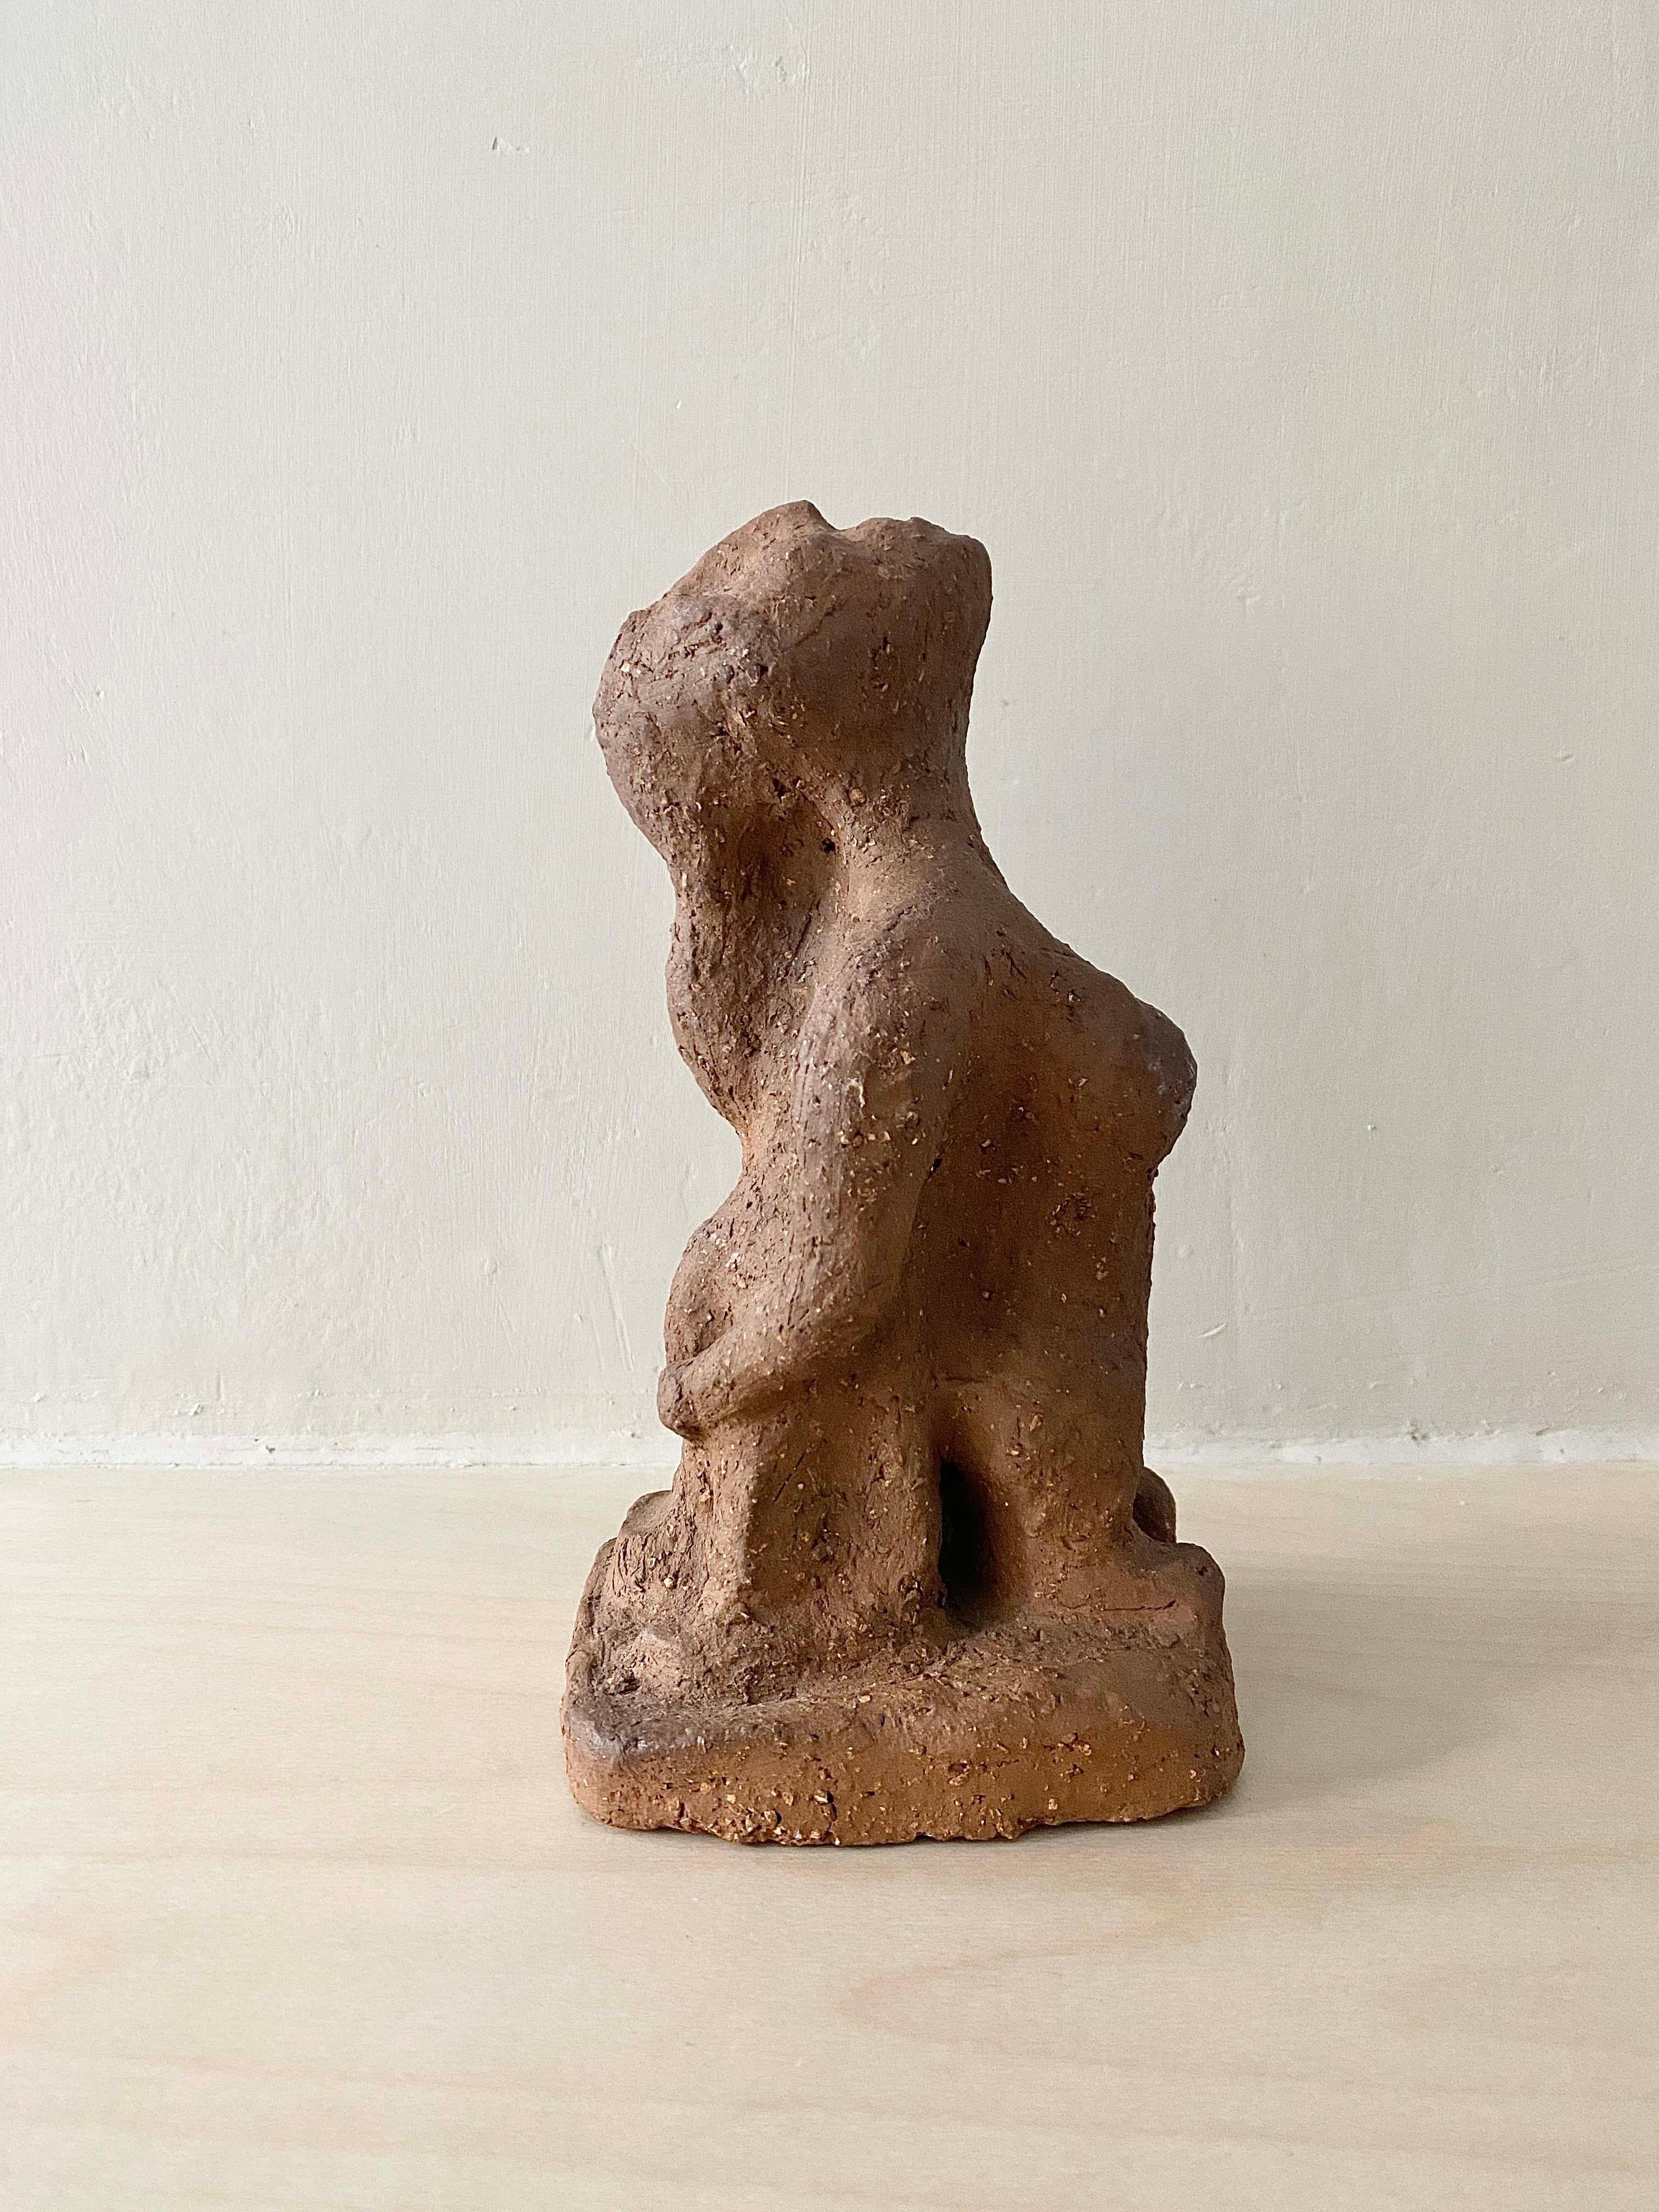 Henry Heerup was a Danish painter, graphic artist and sculptor. From 1948 untill 1951 he was part of the CoBrA movement, together with  Asger Jorn, Karel Appel, Constant and Corneille. This terracotta figure is most likely a sculpture from a body of